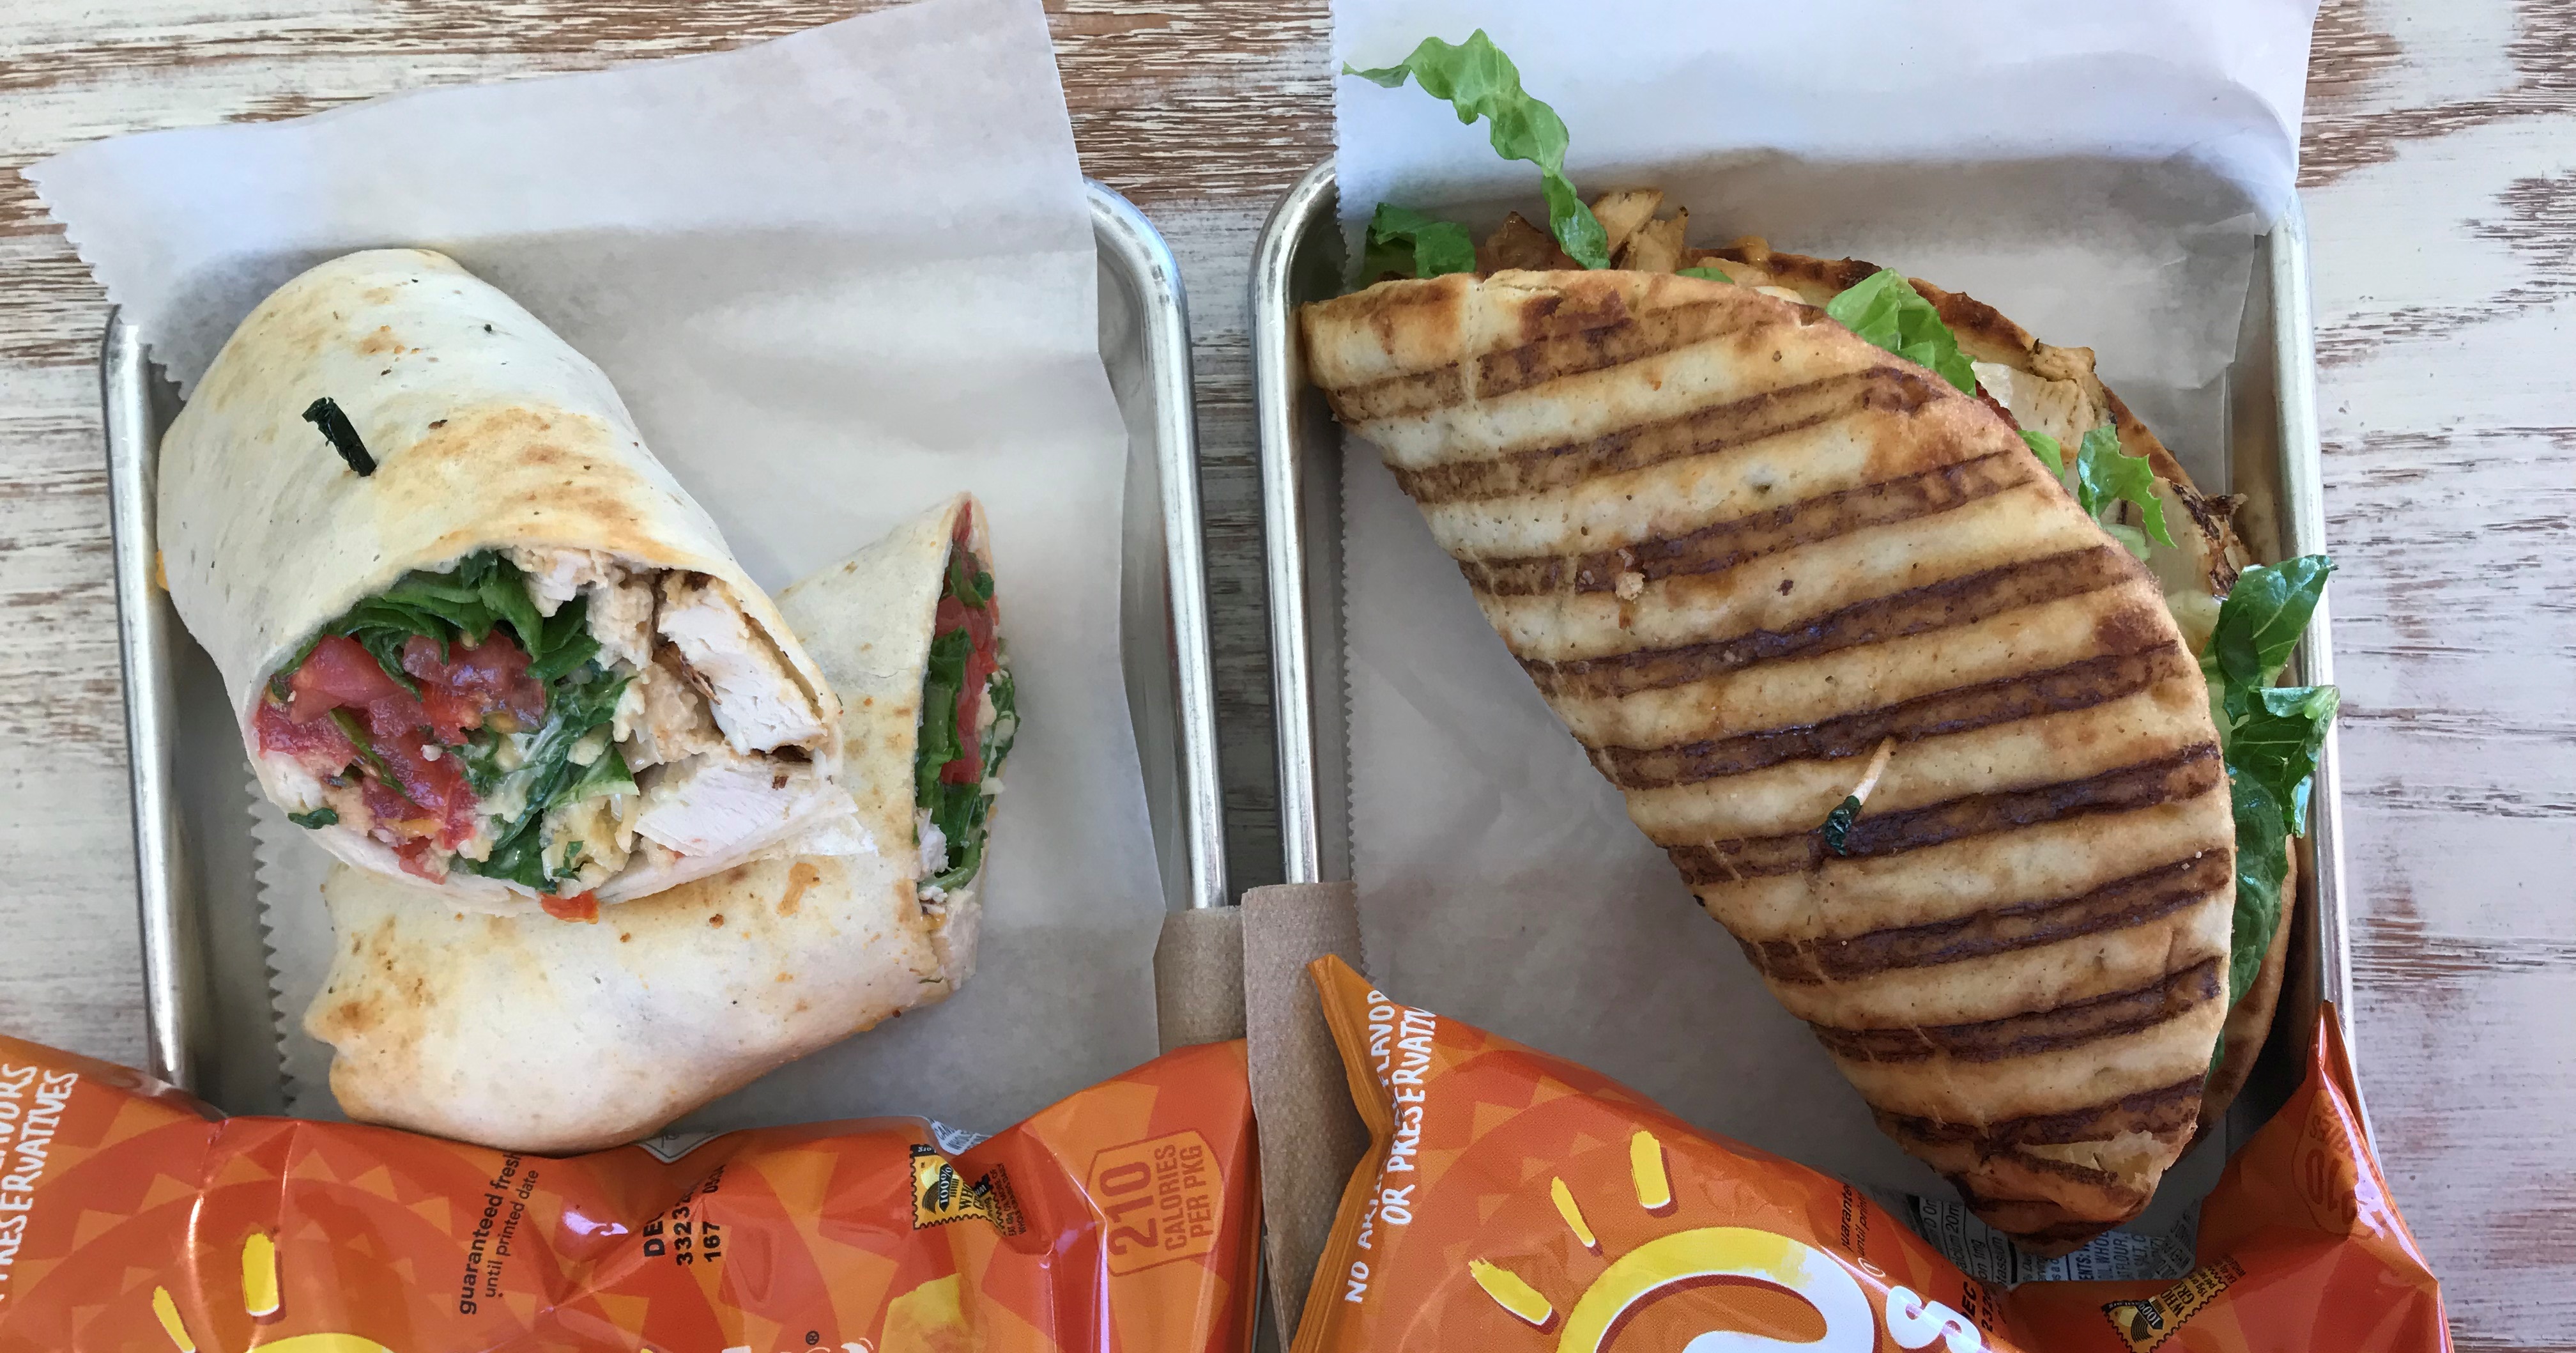 tropical smoothie cafe chipotle chicken club flatbread